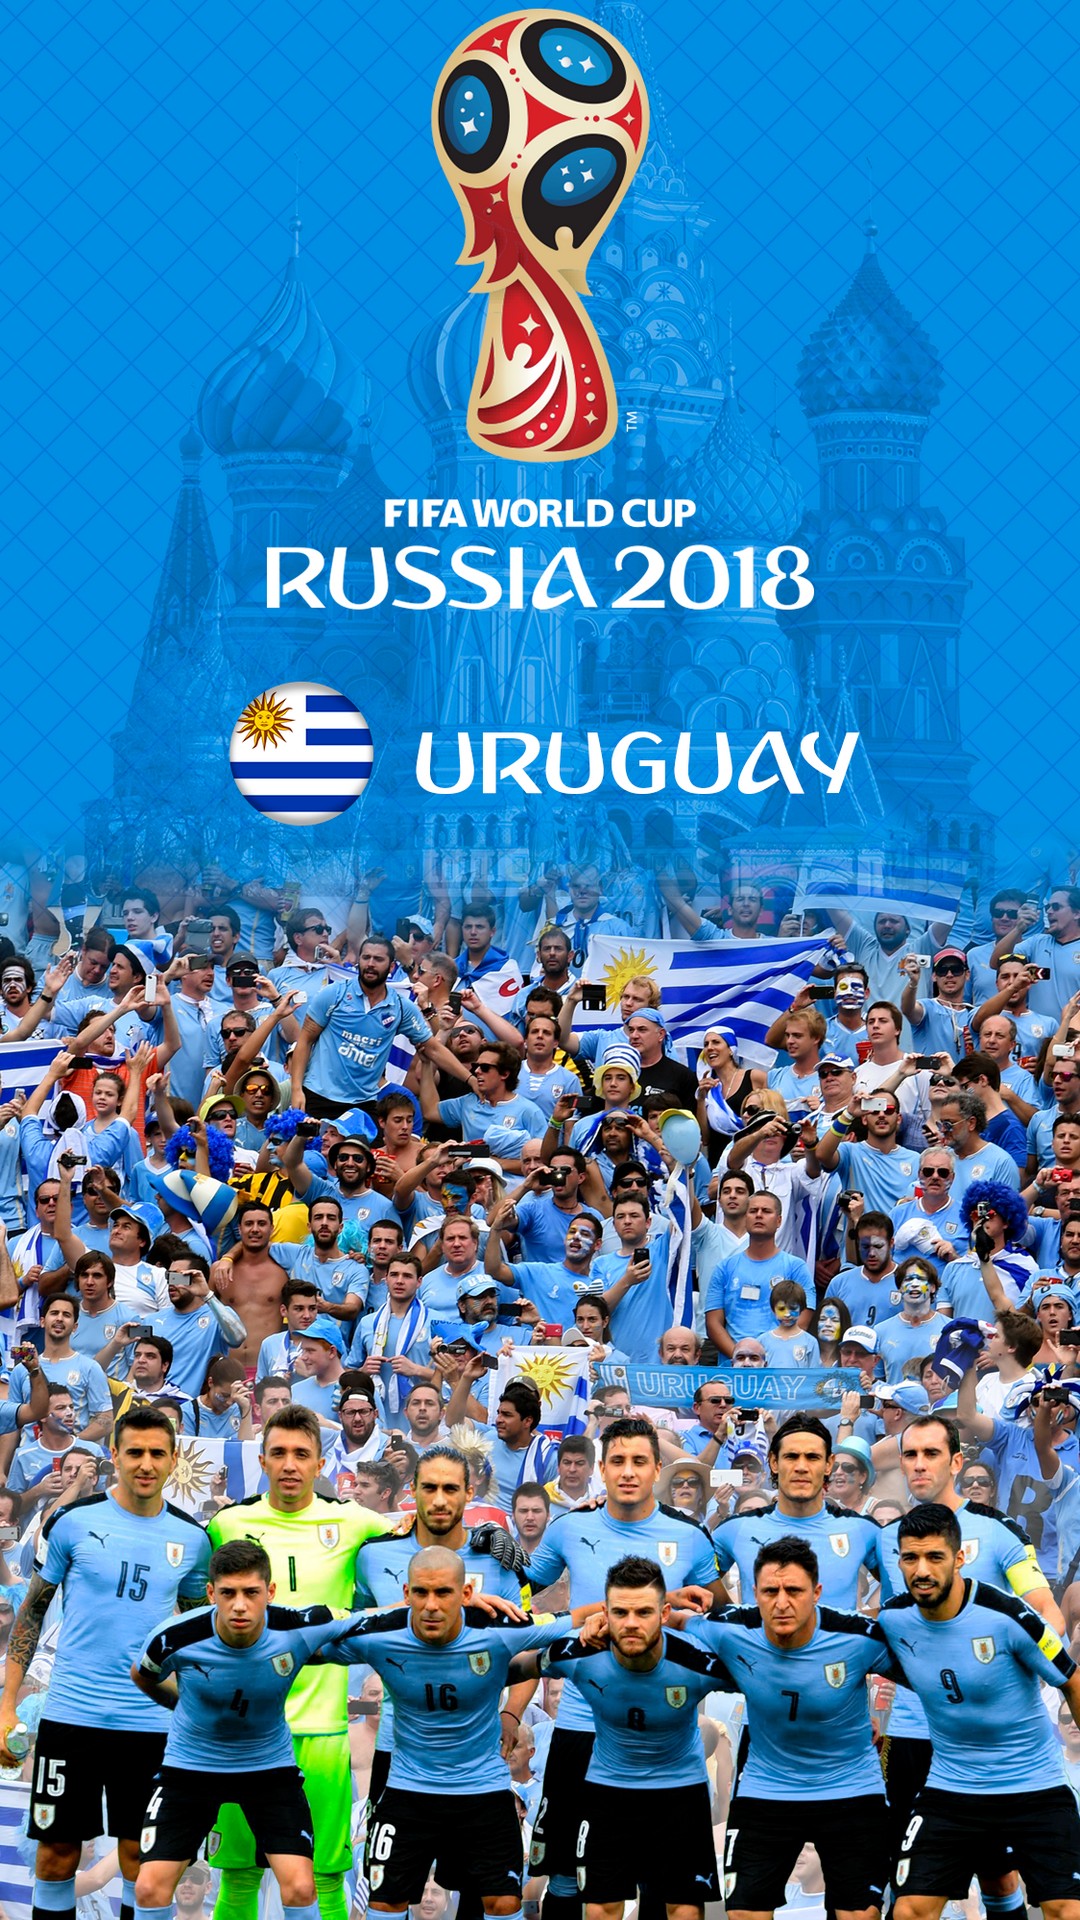 Wallpaper Android Uruguay National Team with image resolution 1080x1920 pixel. You can make this wallpaper for your Android backgrounds, Tablet, Smartphones Screensavers and Mobile Phone Lock Screen